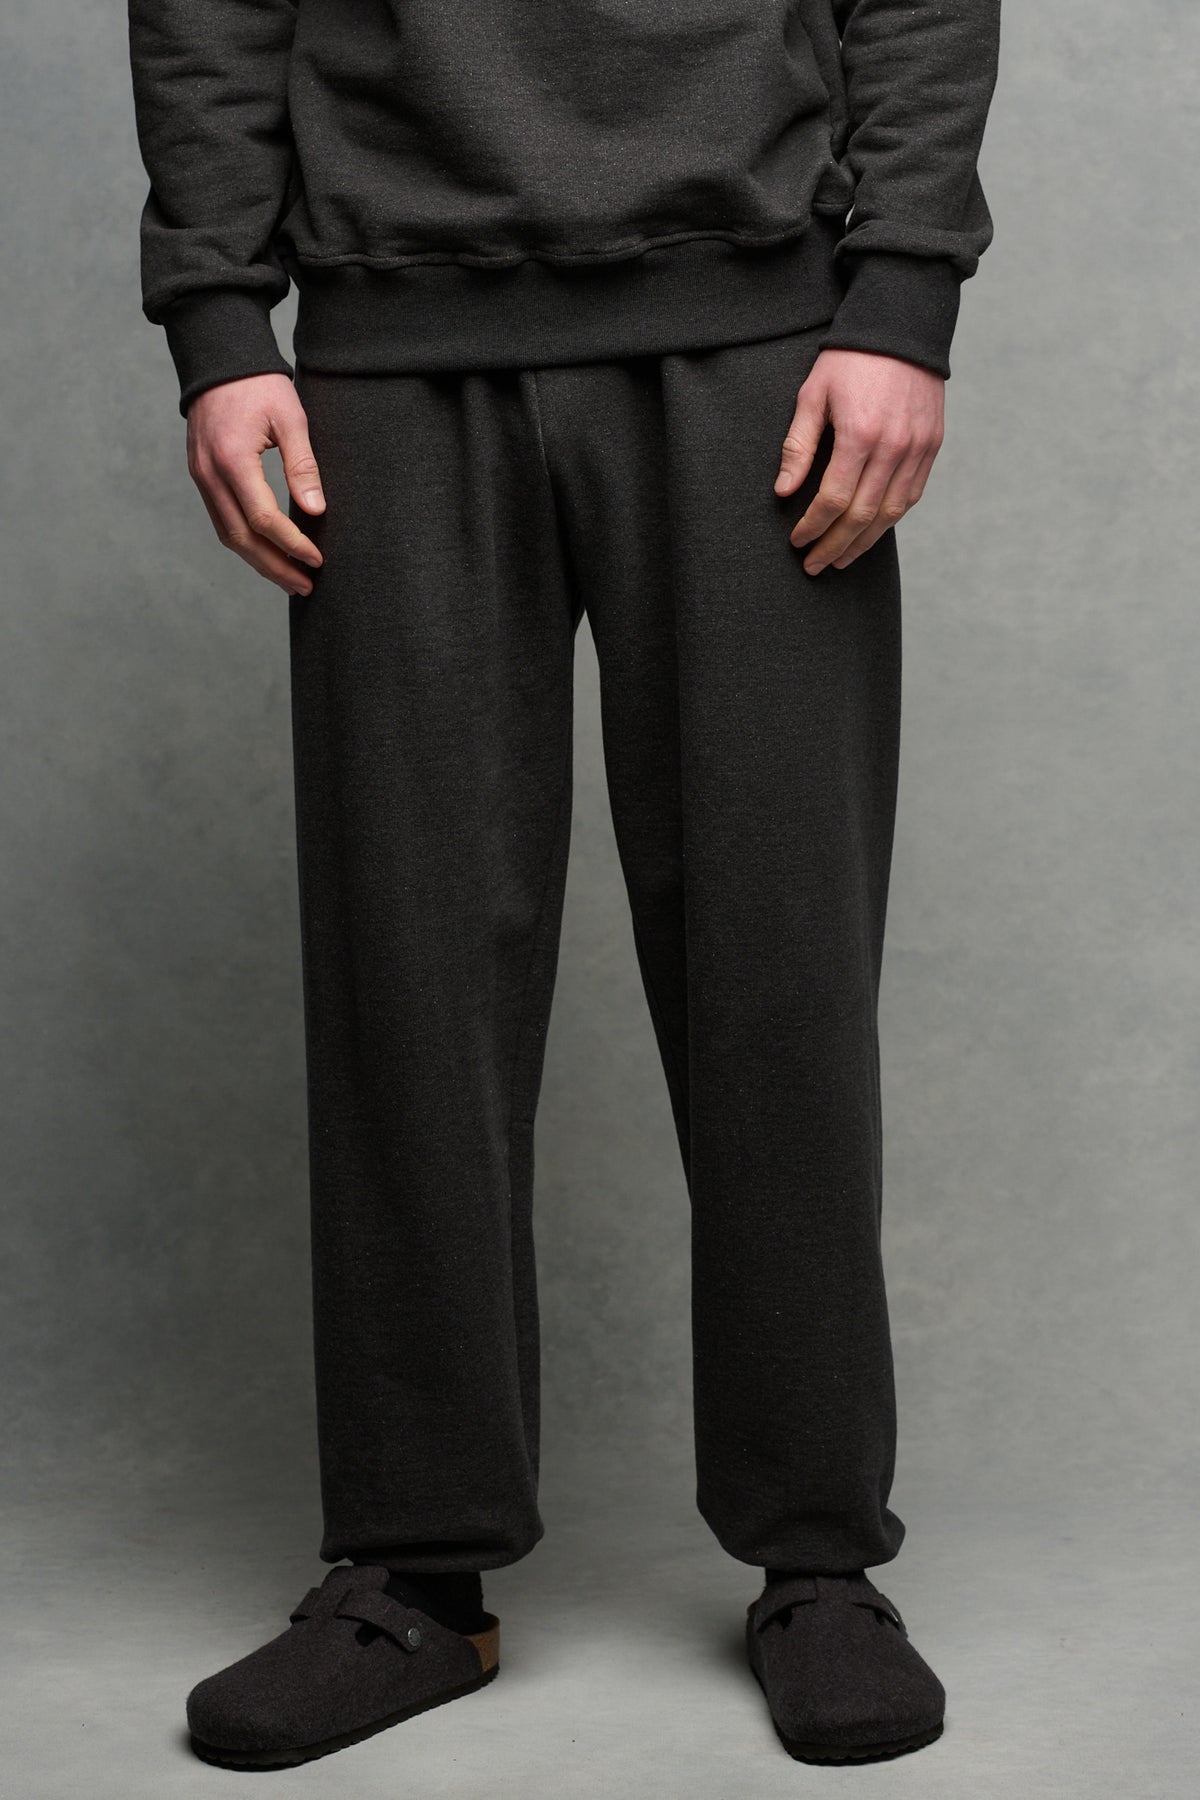 
            Waist down image of male wearing heritage sweatpants in charcoal